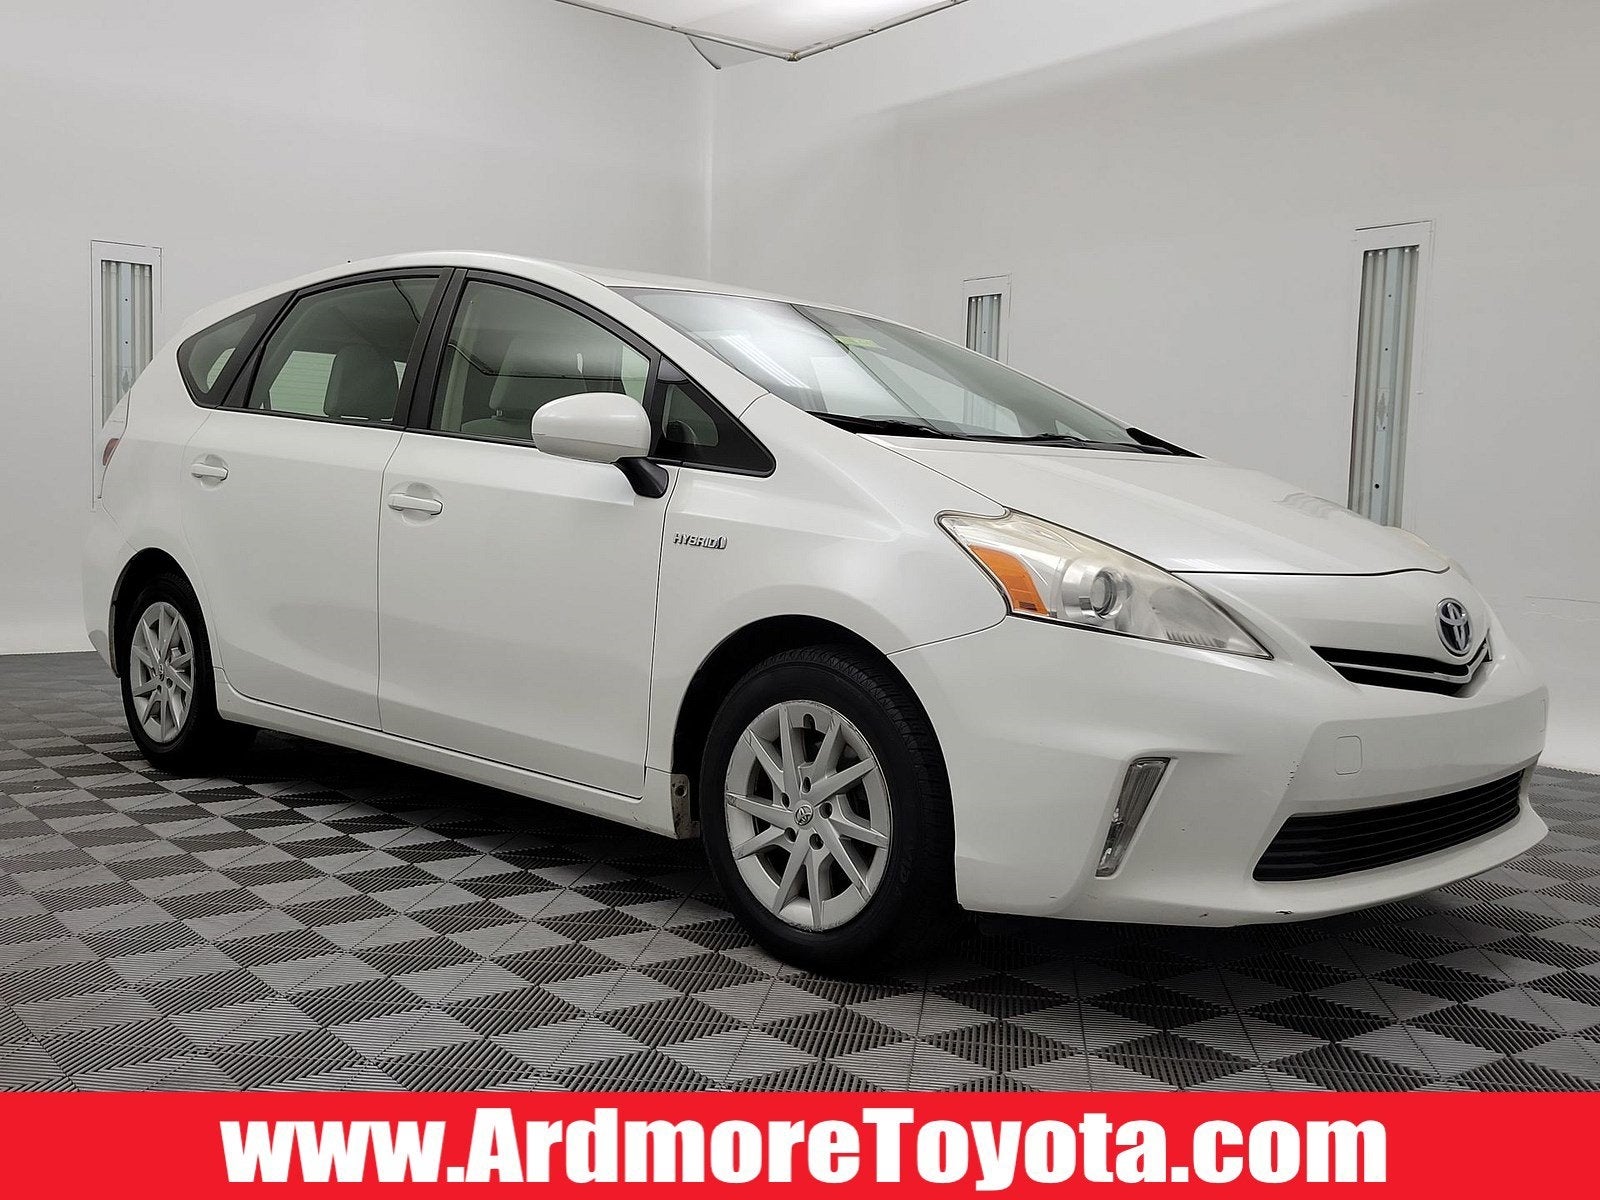 Used 2013 Toyota Prius v Three with VIN JTDZN3EU6D3213335 for sale in Wynnewood, PA